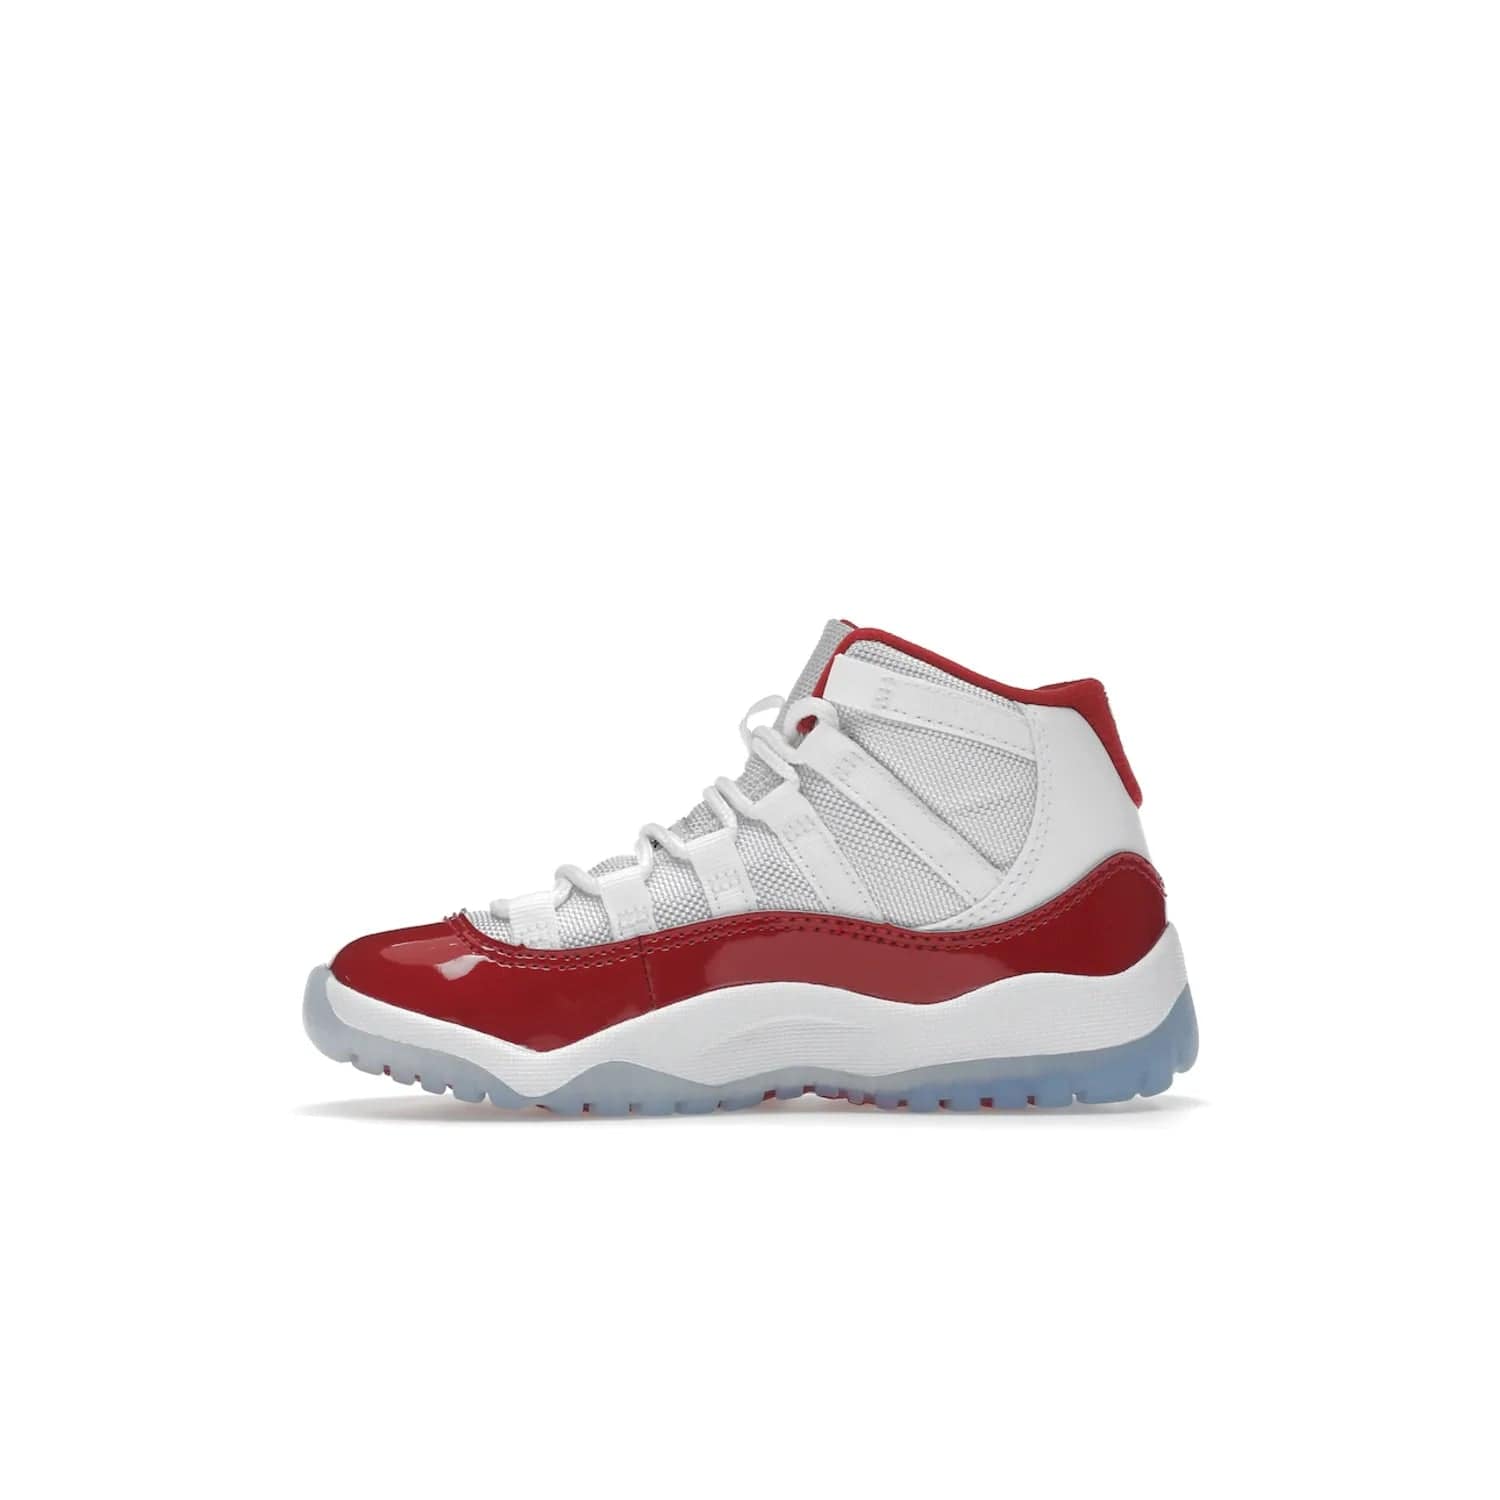 Jordan 11 Retro Cherry (2022) (PS) - Image 19 - Only at www.BallersClubKickz.com - An iconic silhouette with a timeless look, the Air Jordan 11 Retro Cherry 2022 PS features a crisp White, Varsity Red and Black colorway. The upper is made of ballistic mesh, a red patent leather mudguard, '23' branding and white Phylon midsole. Get optimal cushioning and comfort on December 10th, 2022. Don't miss out.